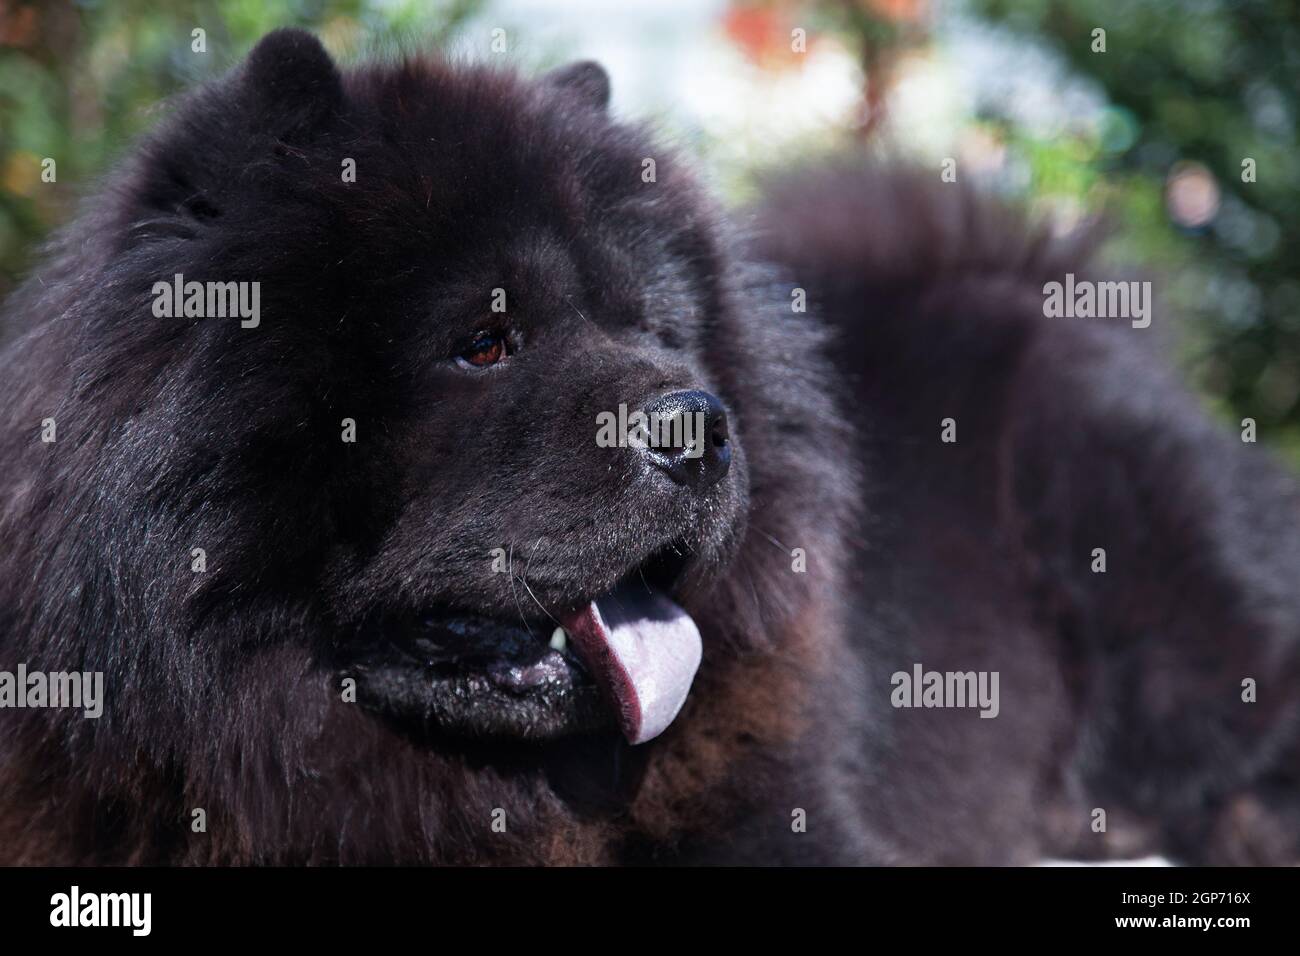 Portrait of a large black shaggy dog of the Chow Chow breed, with open mouth and protruding blue tongue Stock Photo